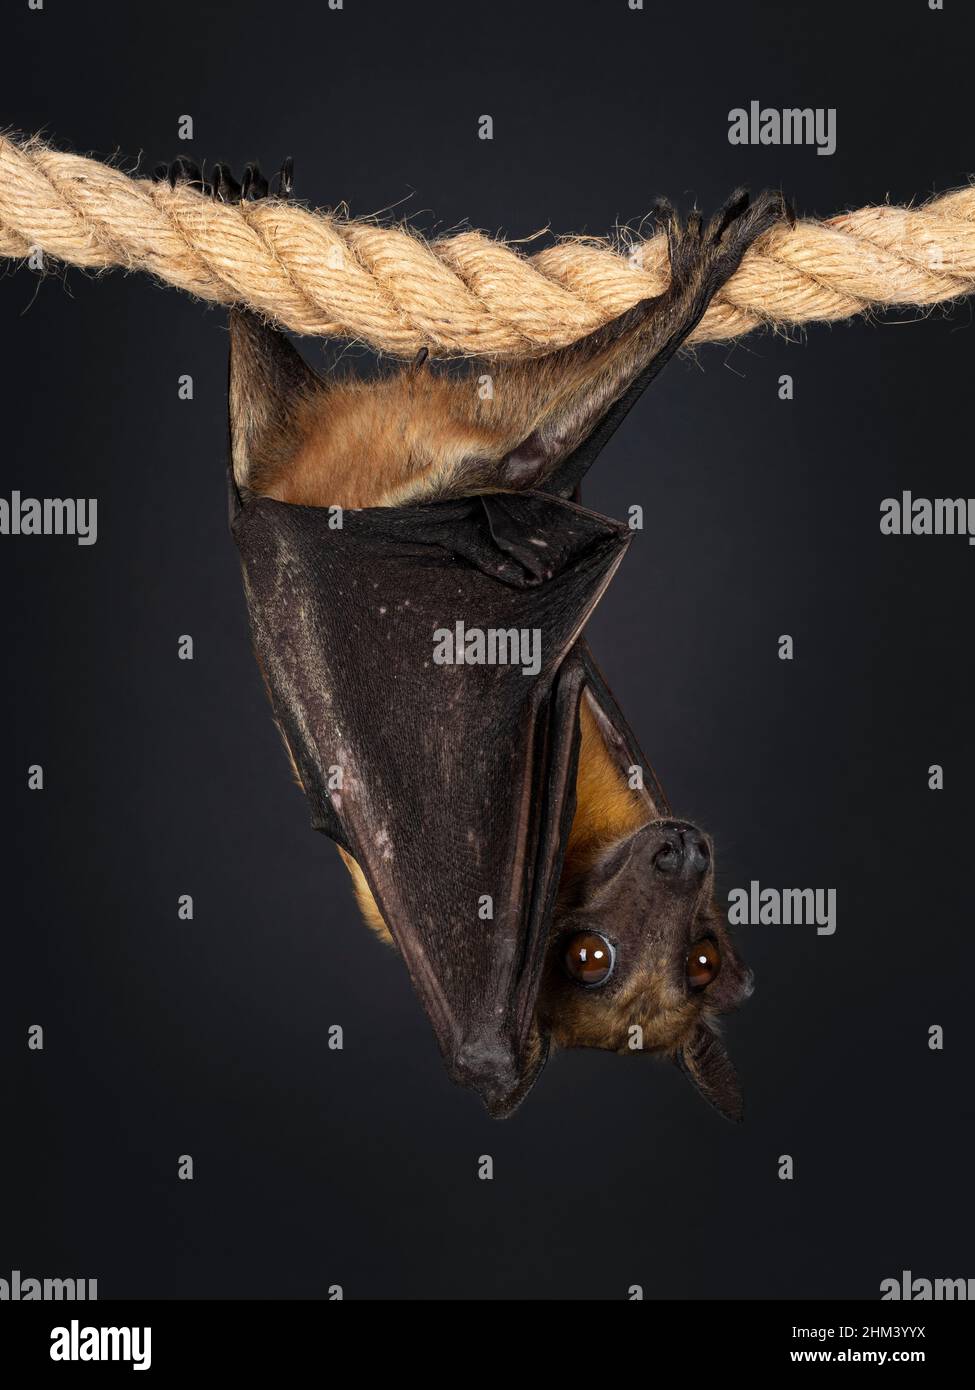 Young adult flying fox, fruit bat aka Megabat or chiroptera, hanging backwards on sisal rope. Looking from behind wings to camera. Isolated on black b Stock Photo